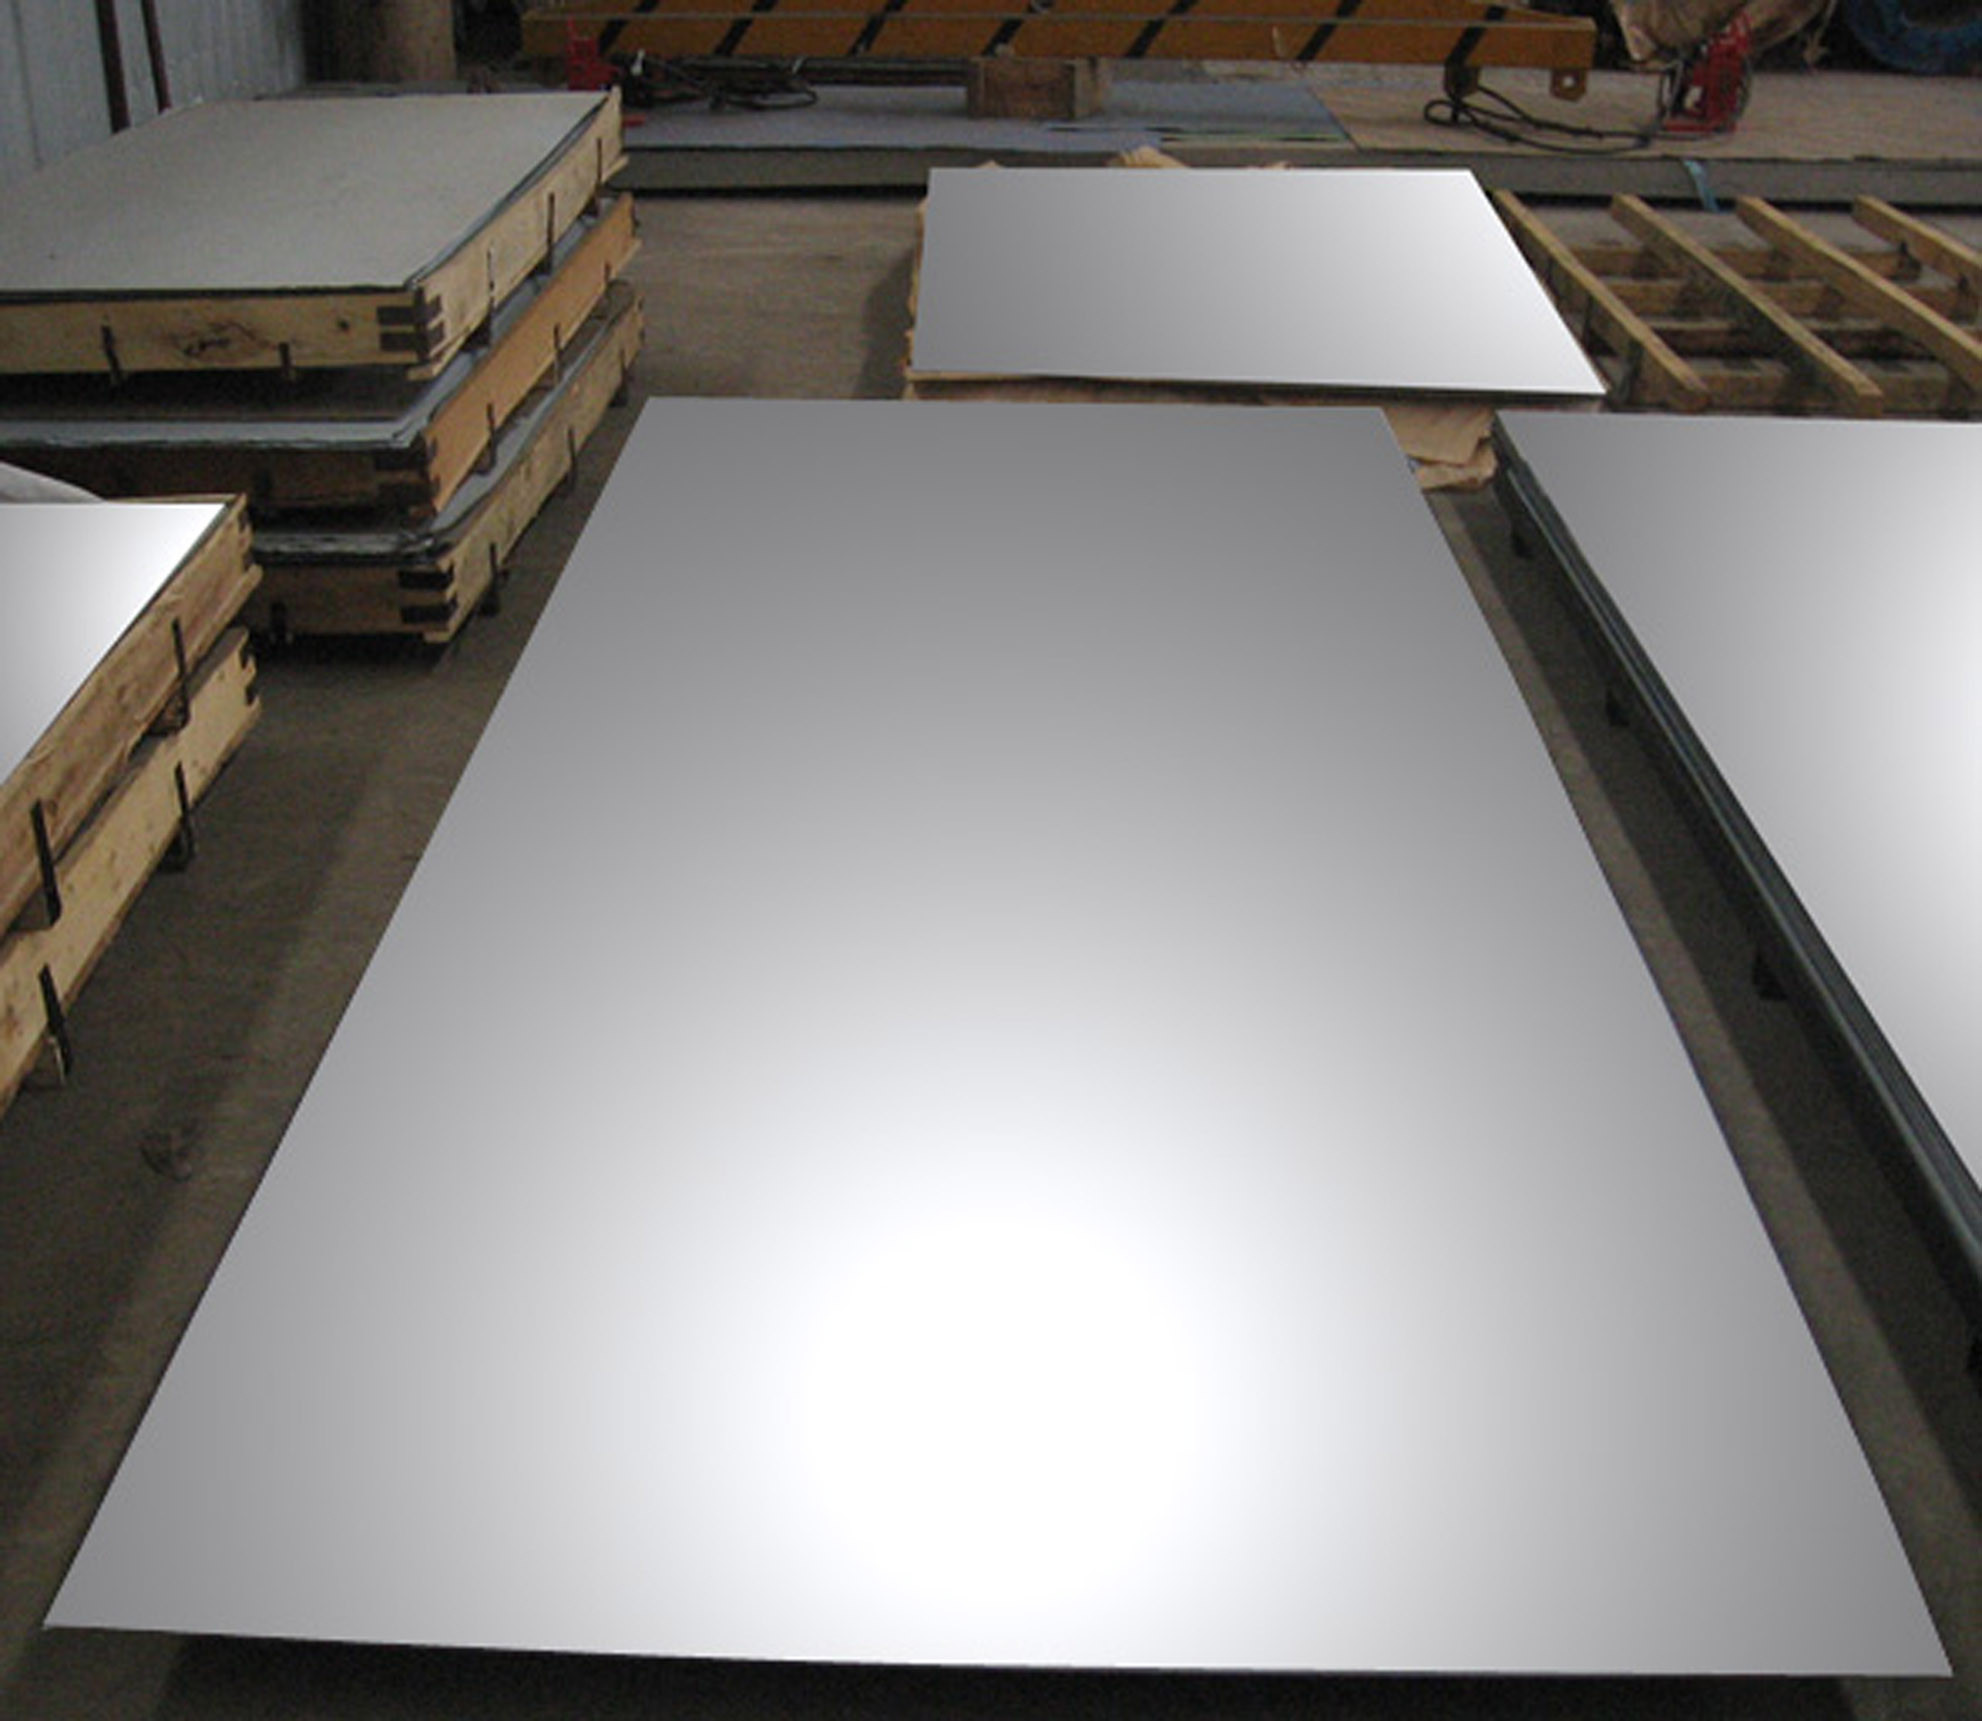 4x8_310_316l_321_textured_cutting_mirror_finish_strong_style_color_b82220_stainless_steel_sheet_strong_oem.jpg